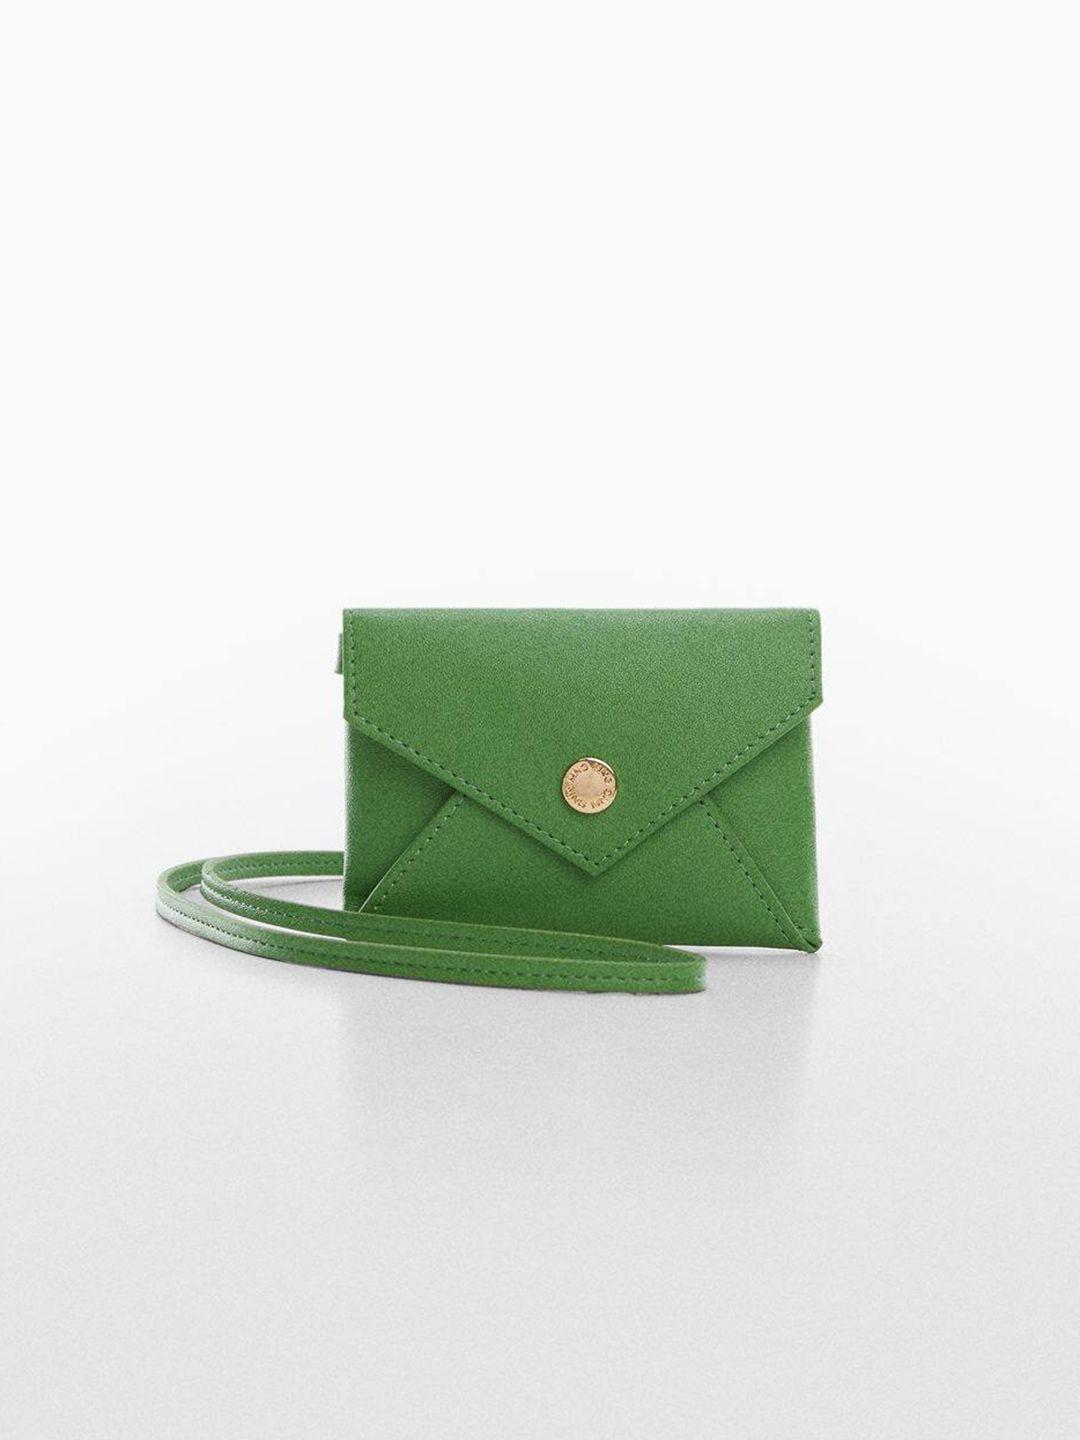 mango coin envelope purse with wrist loop